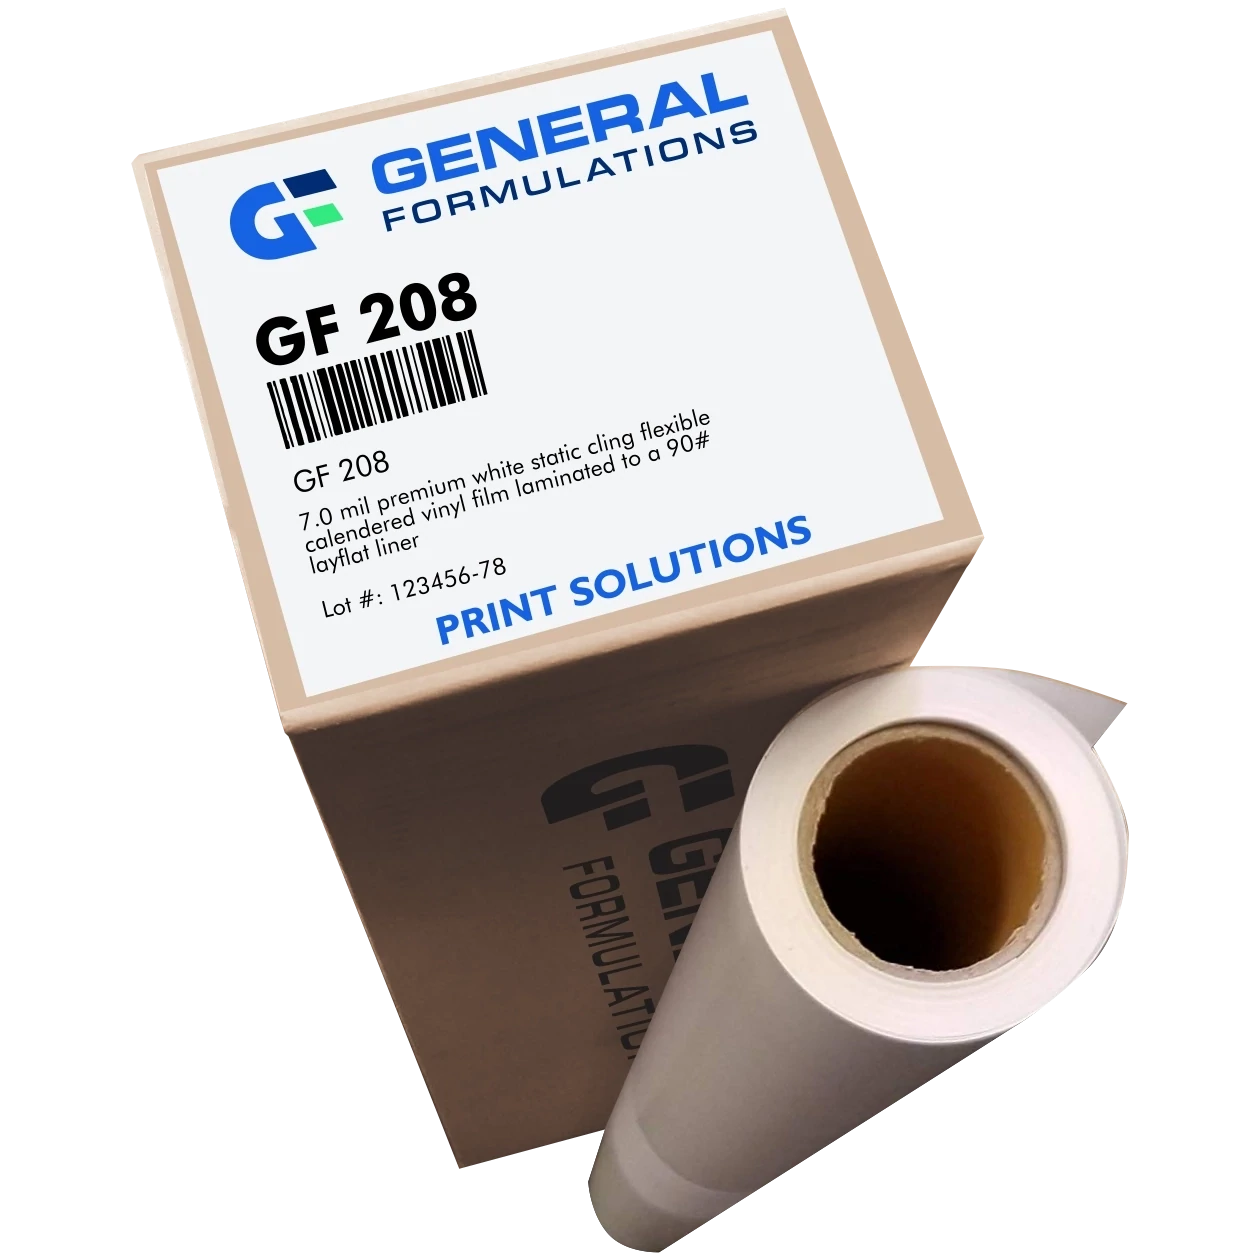 General Formulations 208 White Static Cling, Select Size:: 54" x 75'